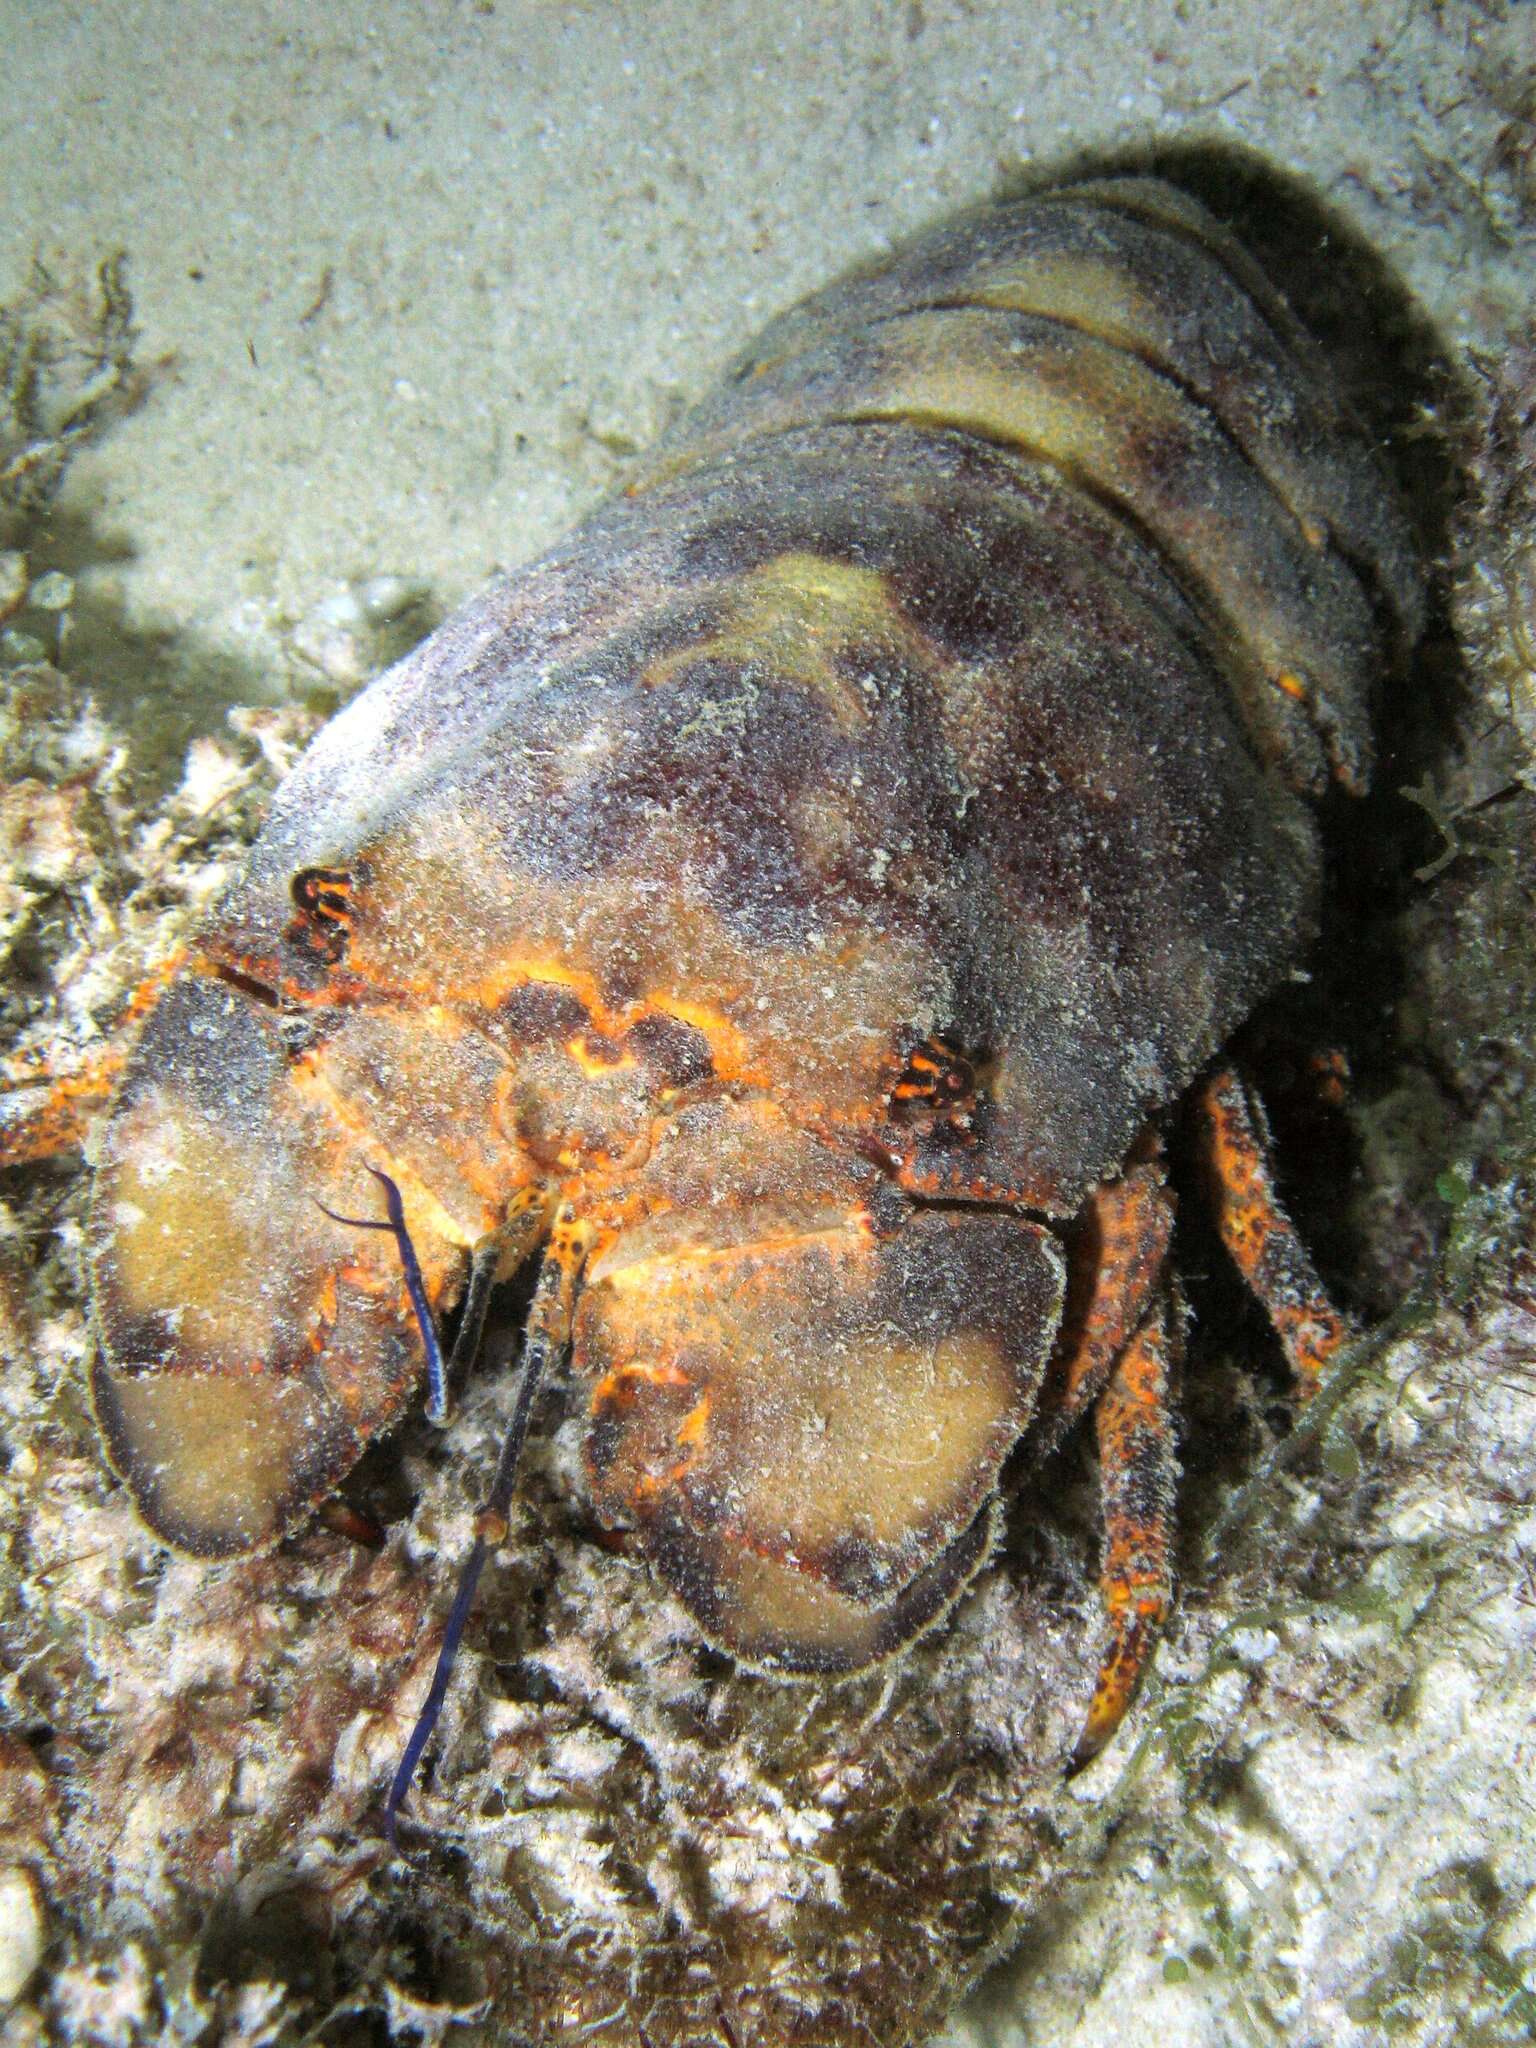 Image of French lobster